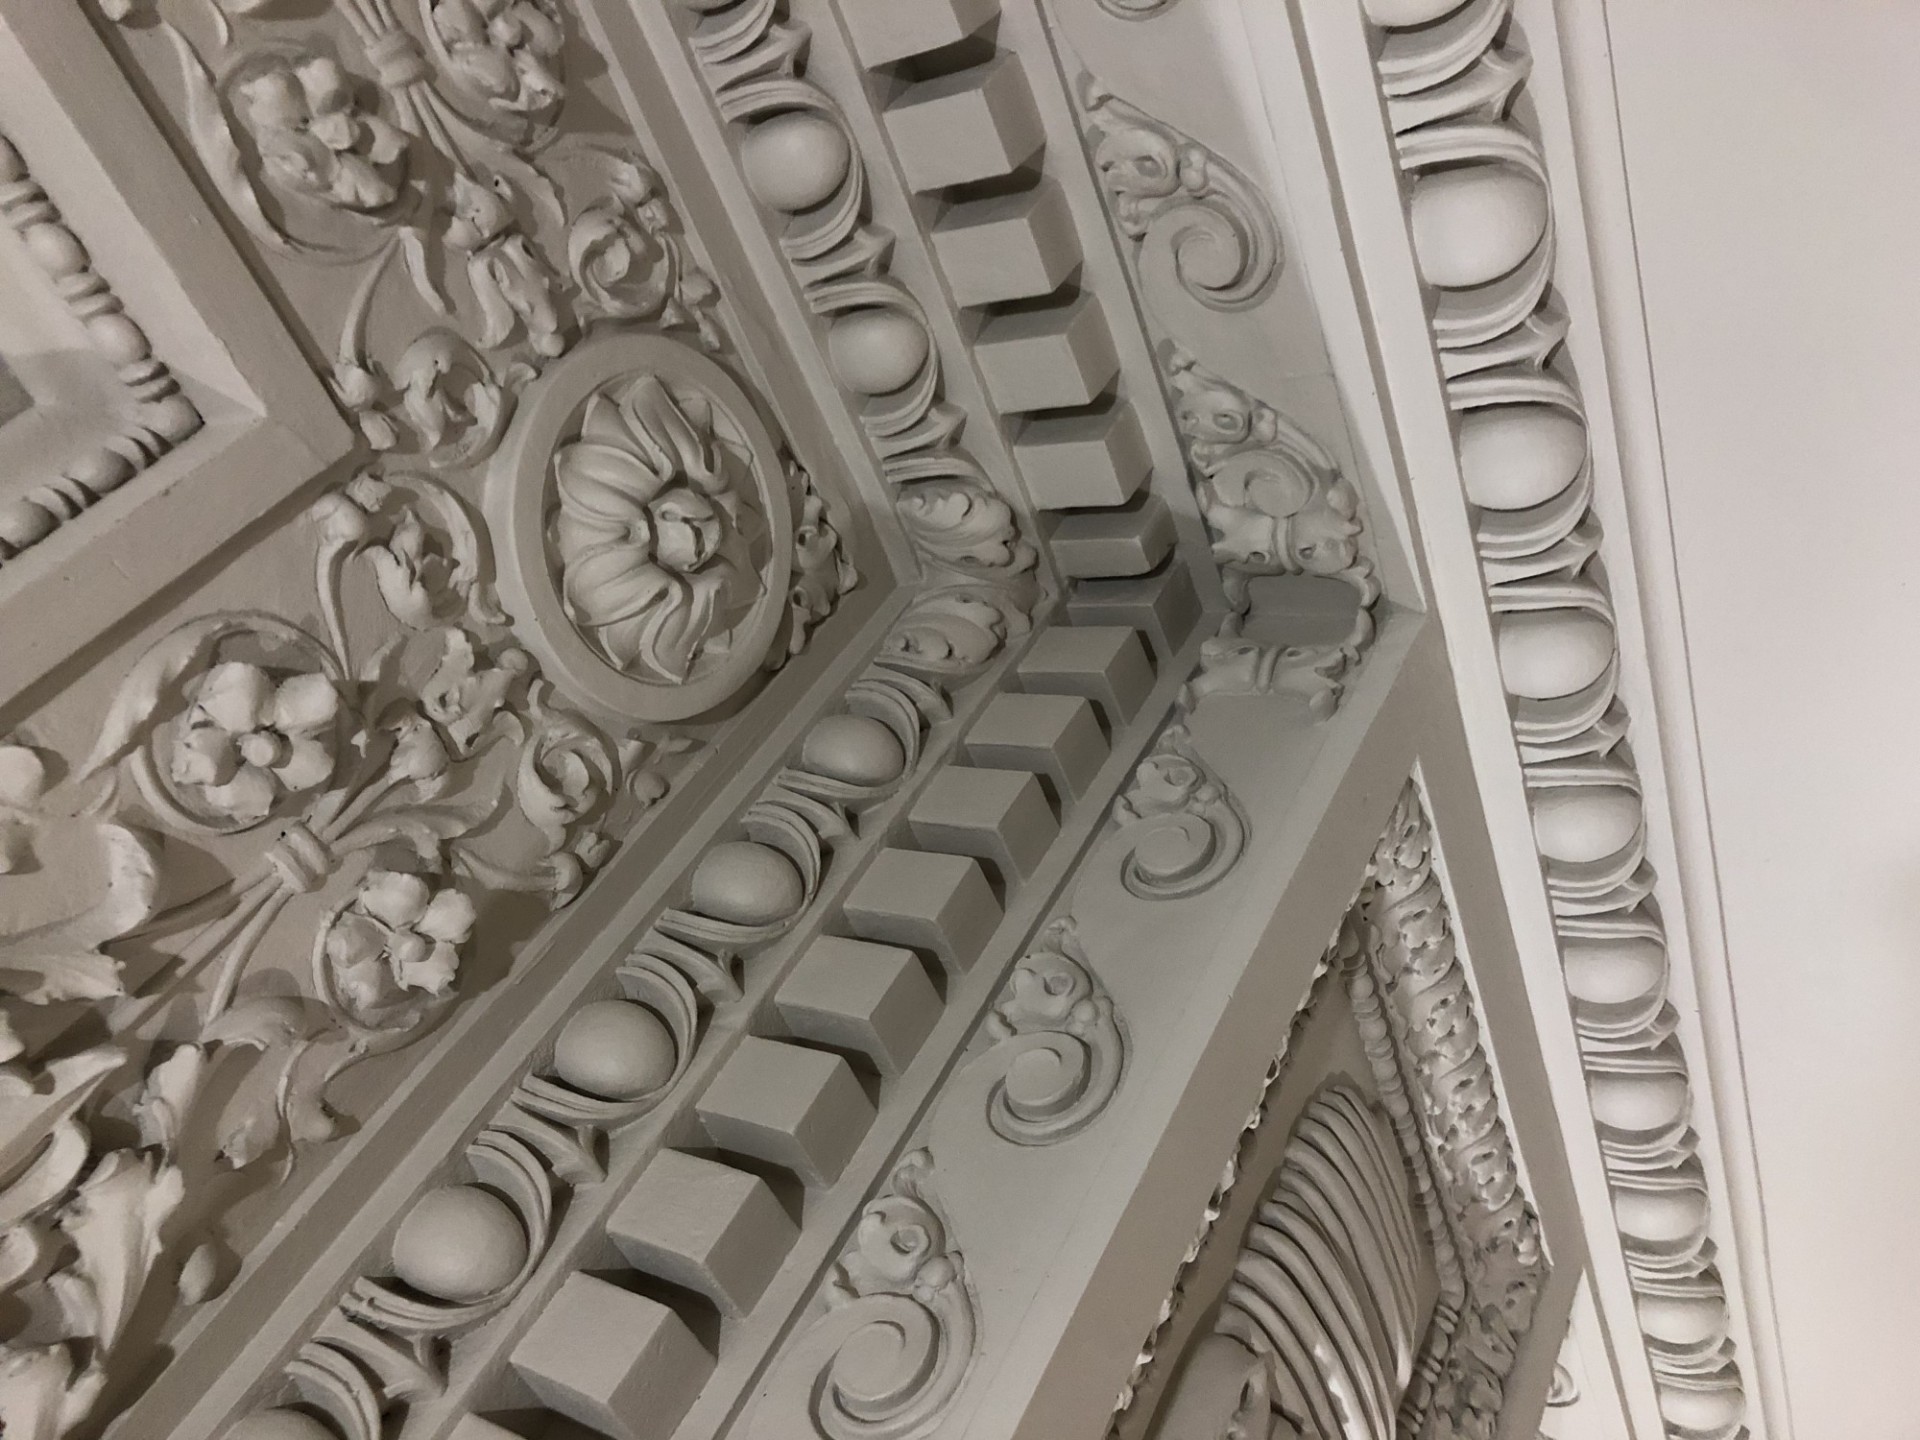 A close-up view of a section of the repaired and restored ornate plaster ceiling.